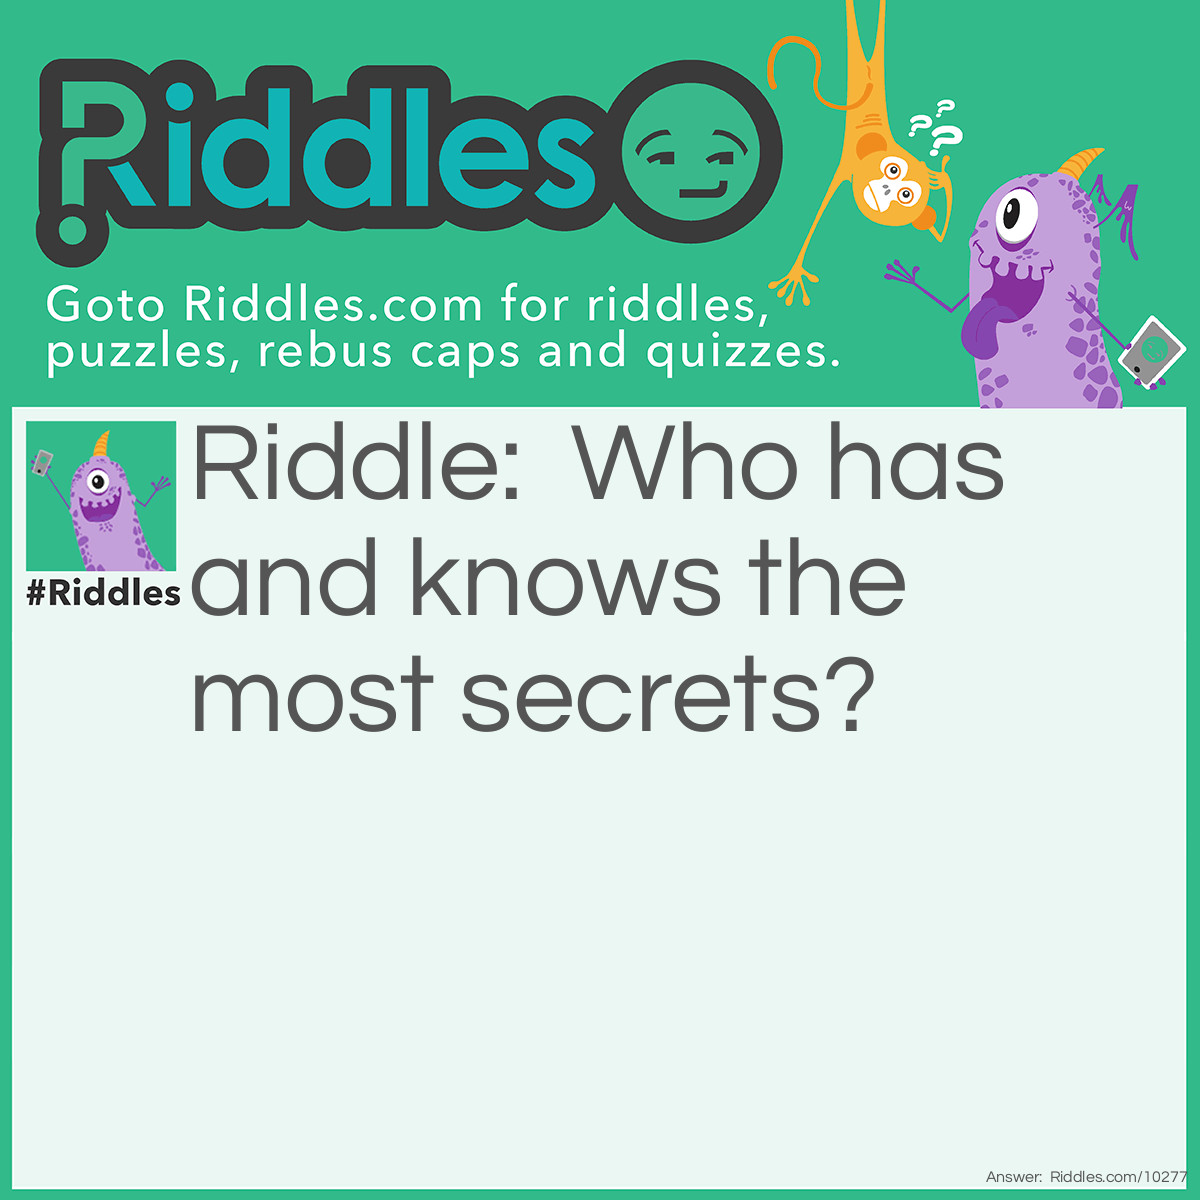 Riddle: Who has and knows the most secrets? Answer: The Secretary.